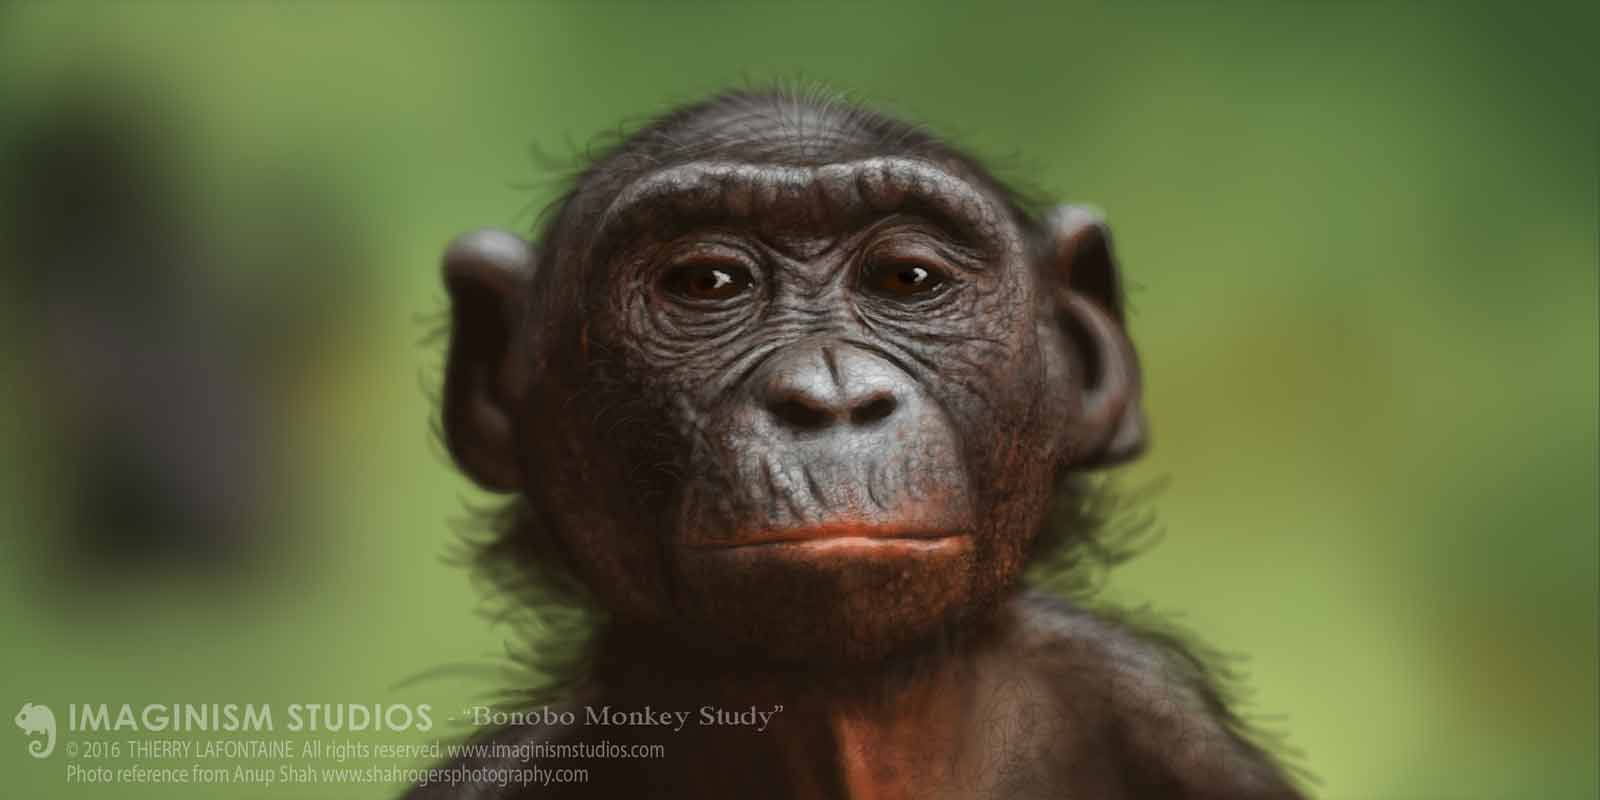 A picture of a bonobo monkey